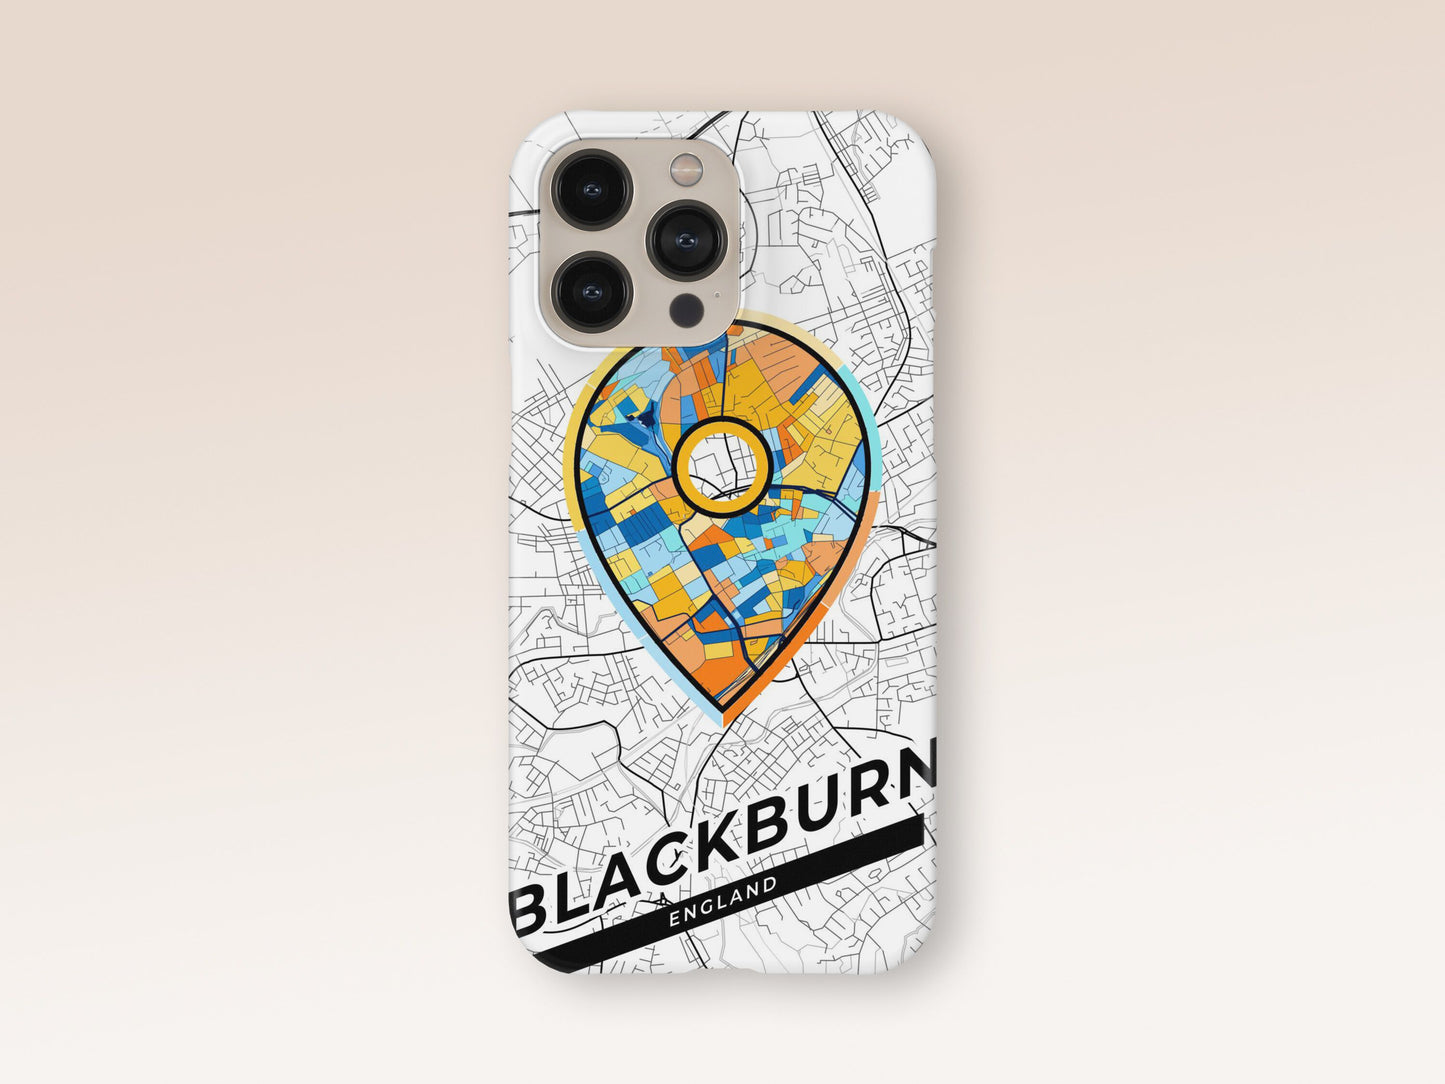 Blackburn England slim phone case with colorful icon. Birthday, wedding or housewarming gift. Couple match cases. 1